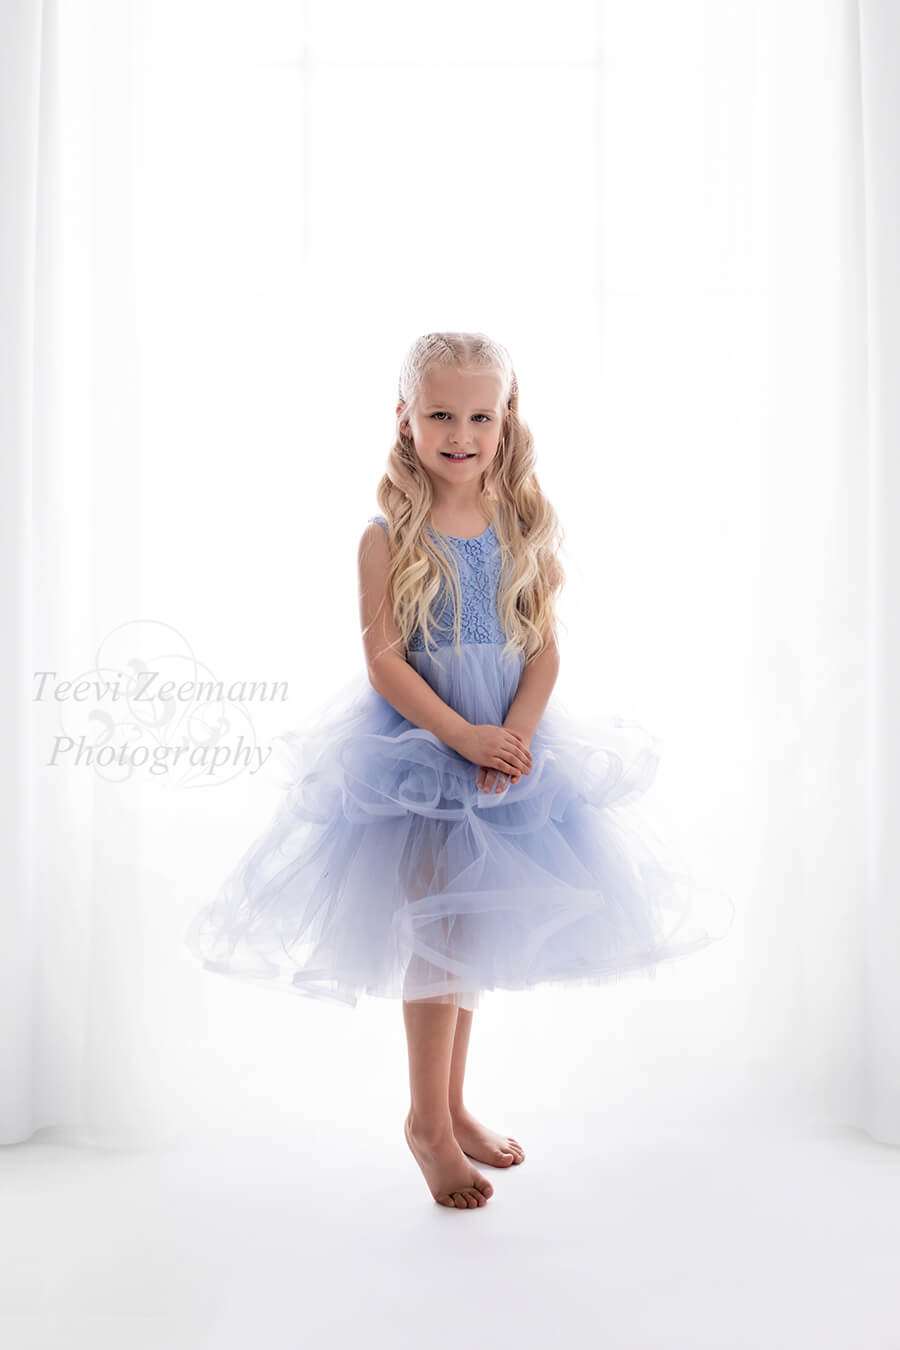 blond kid poses in a white studio wearing a short dress made of lace and tulle in light blue color. she is holding her hands and smiling to the camera.